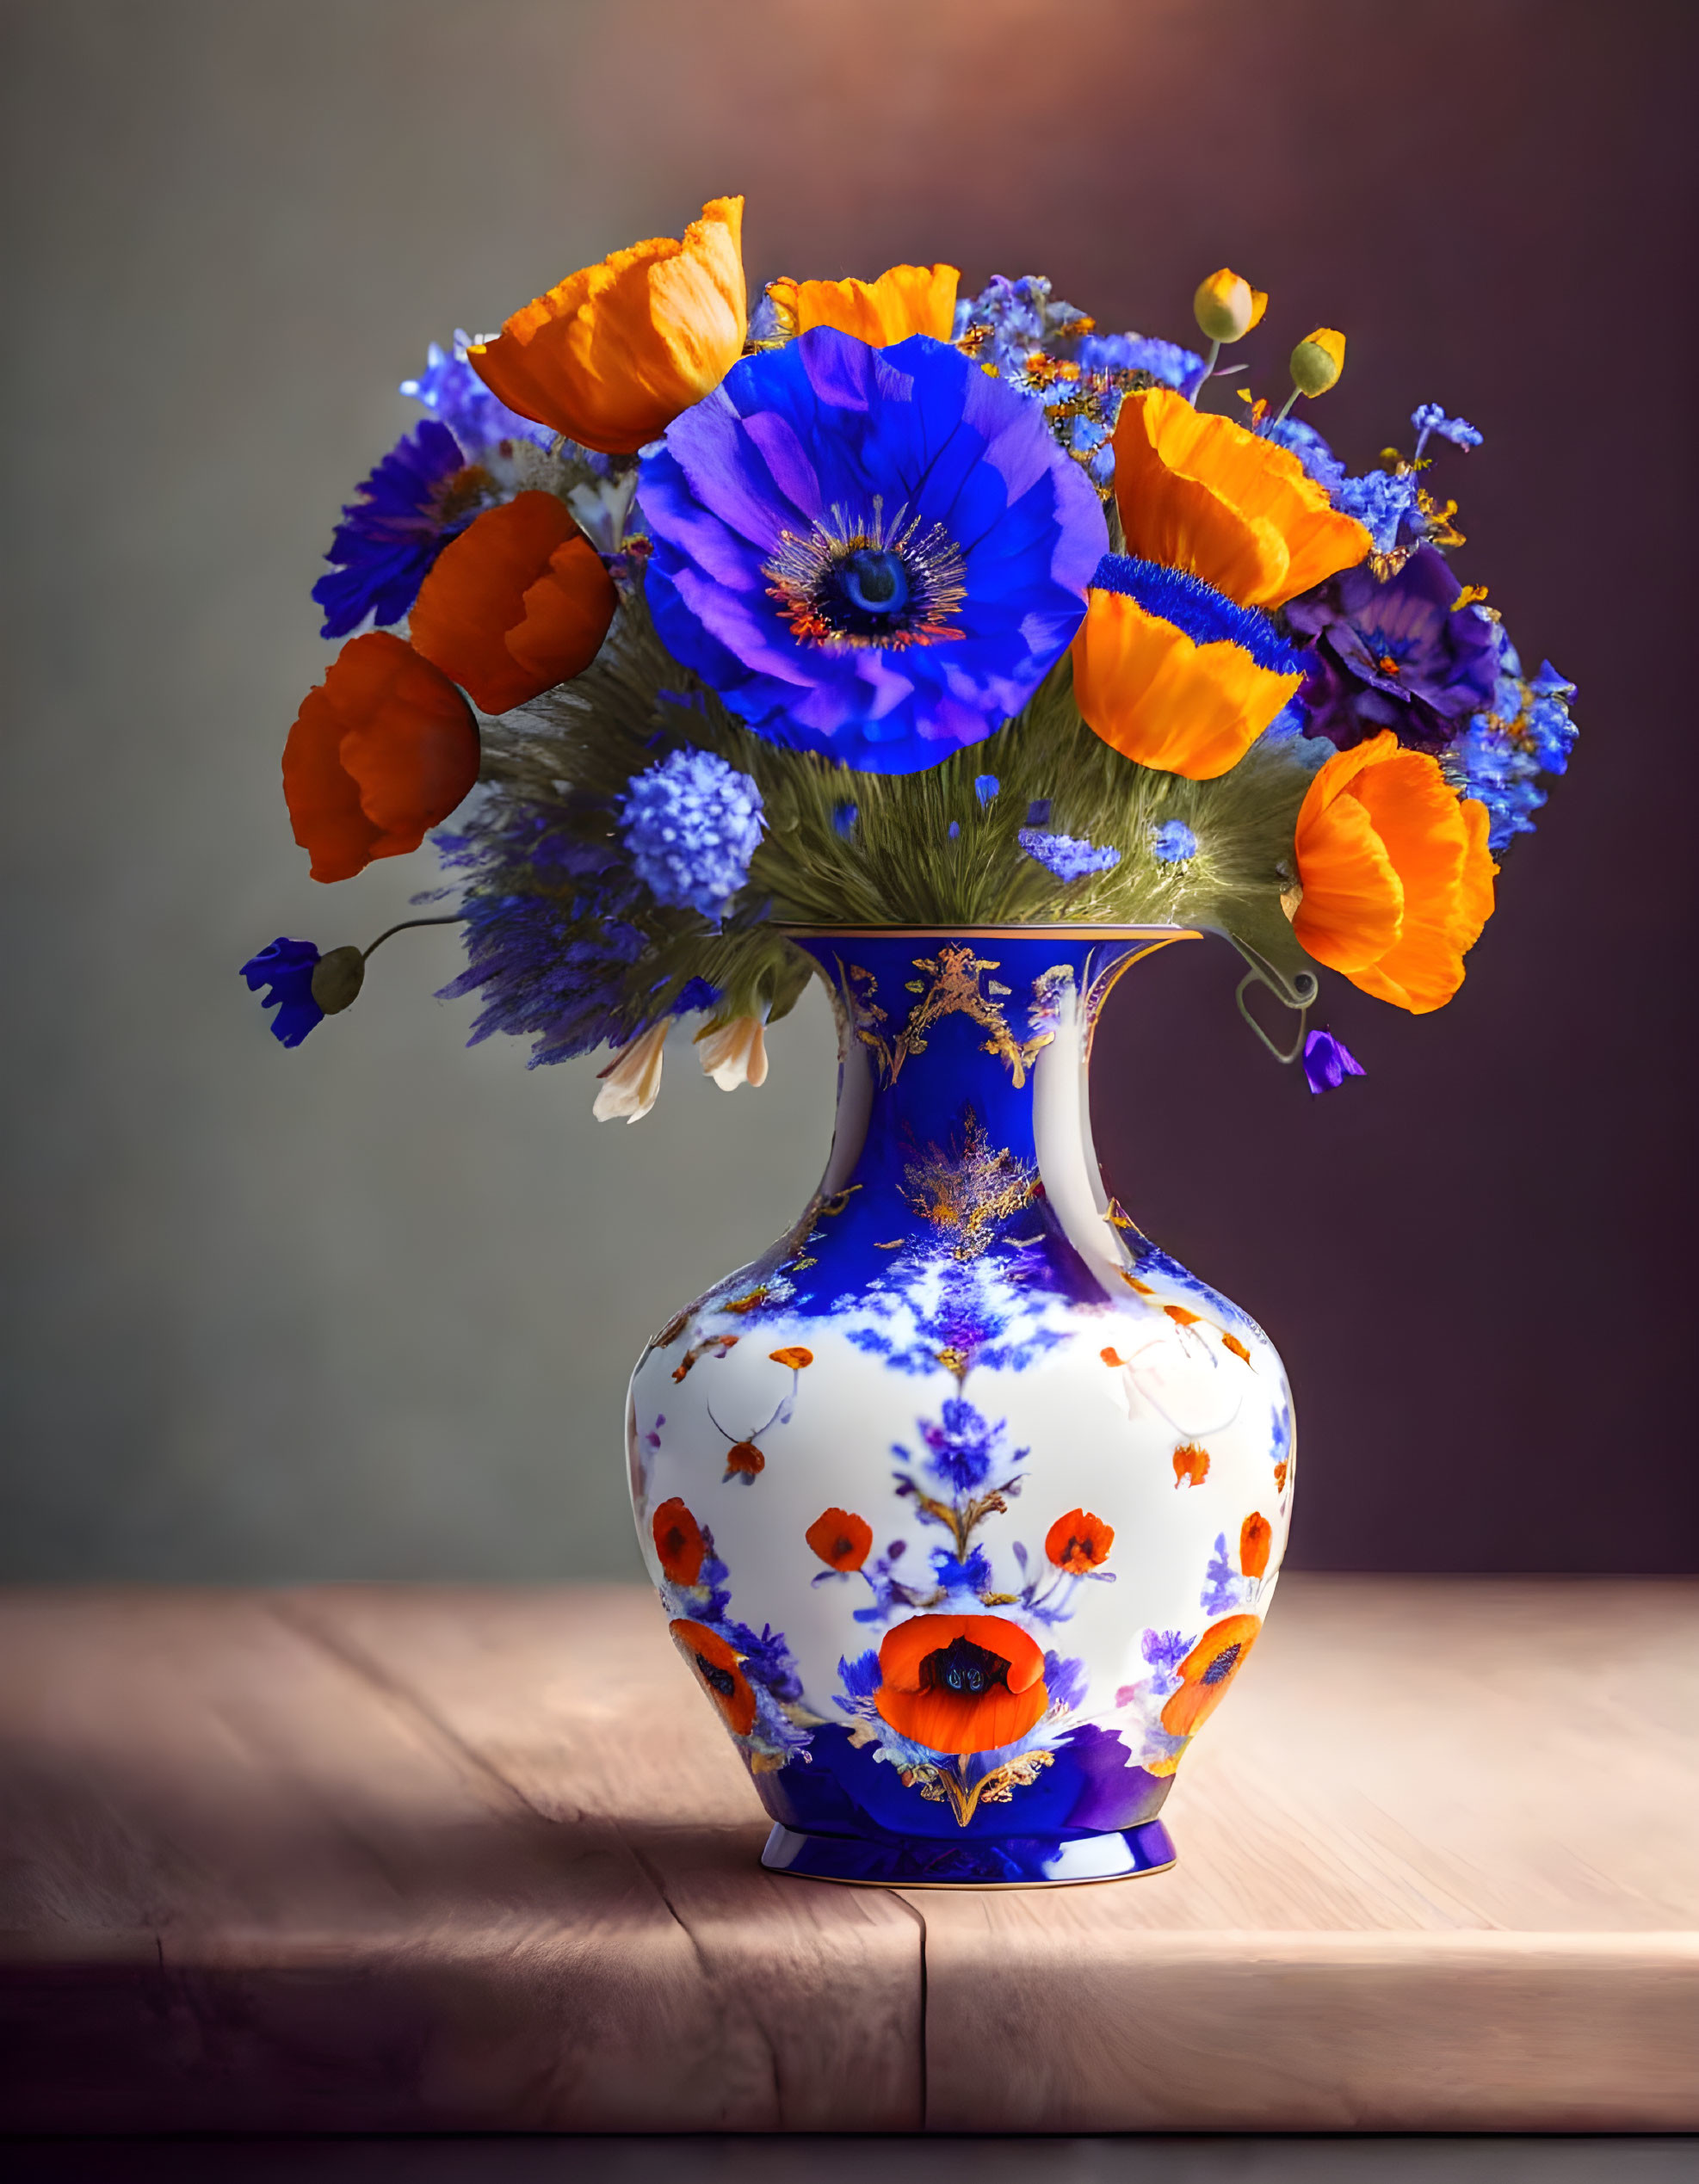 A beautiful vase, with poppies and cornflowers